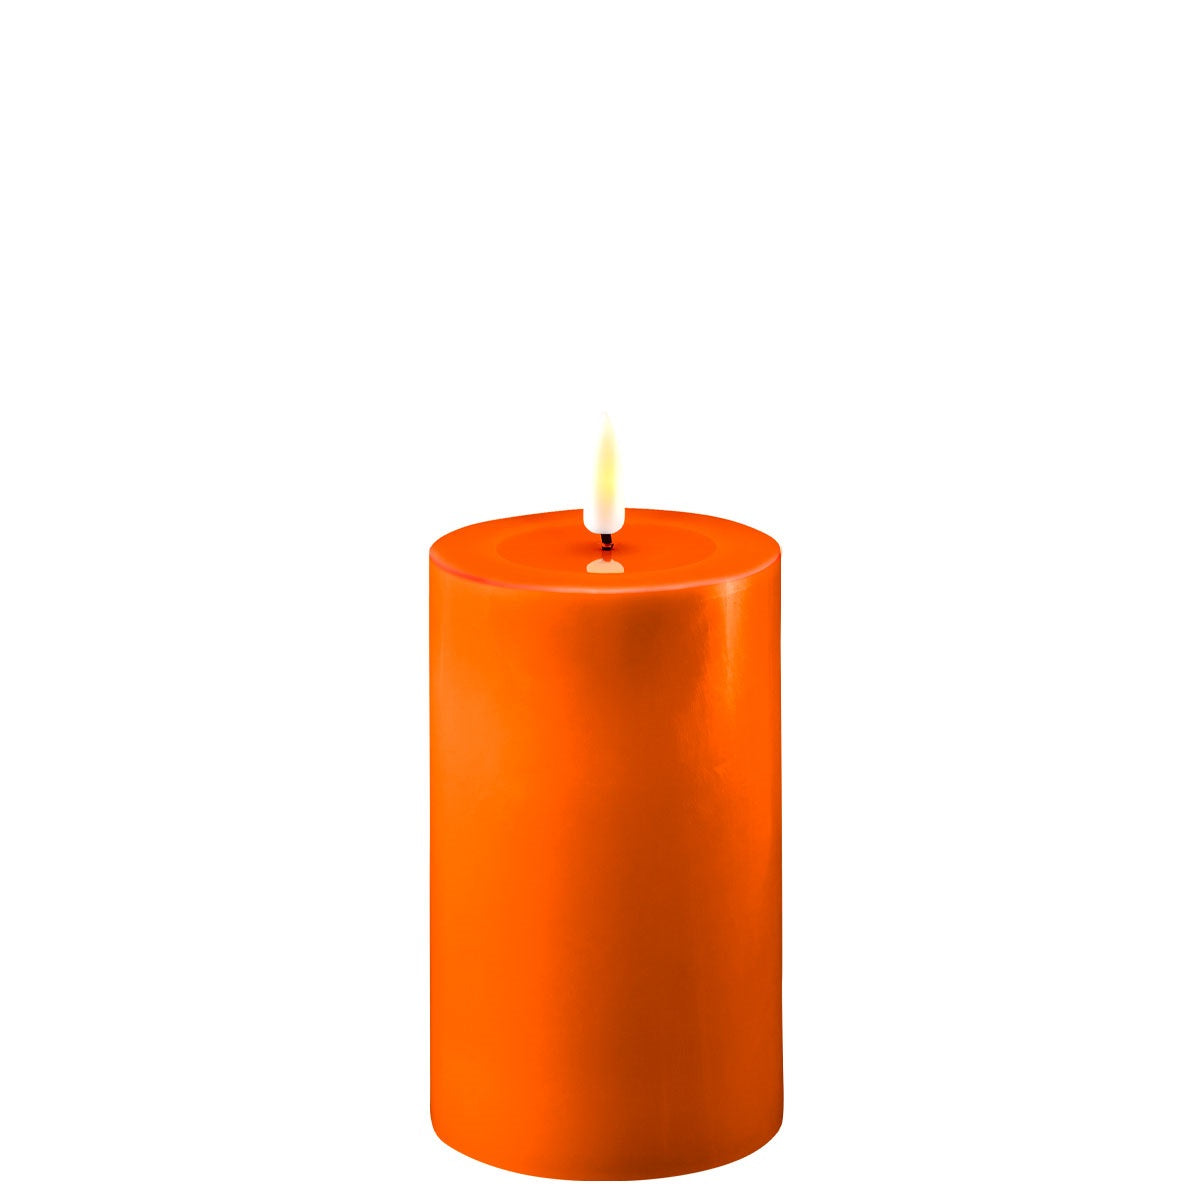 Deluxe Homeart LED pillar candle in Orange 7.5cm x 12.5cm